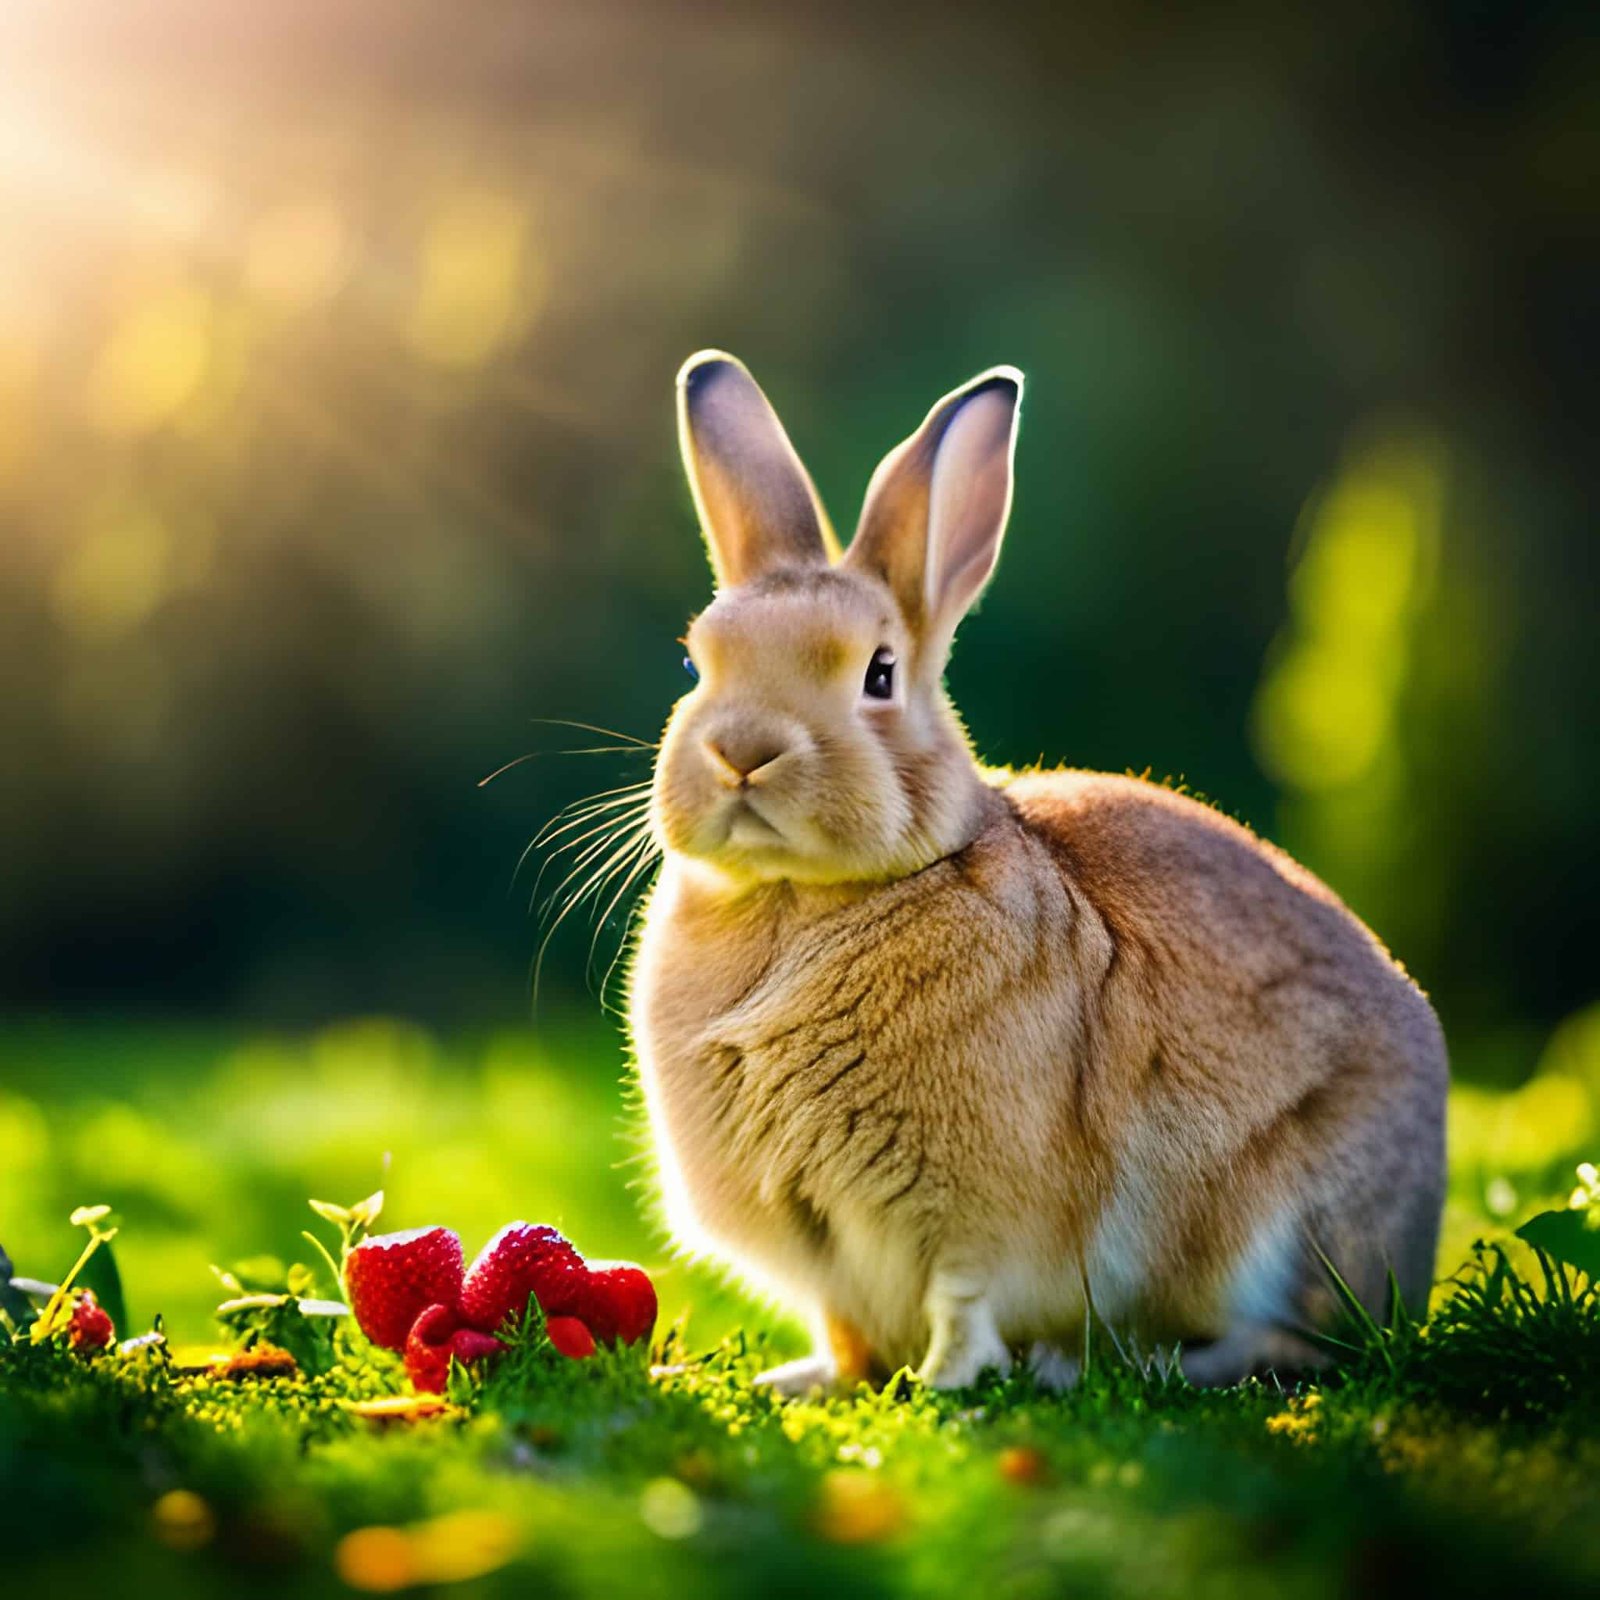 What is the Best Fruit for Rabbits to Eat?